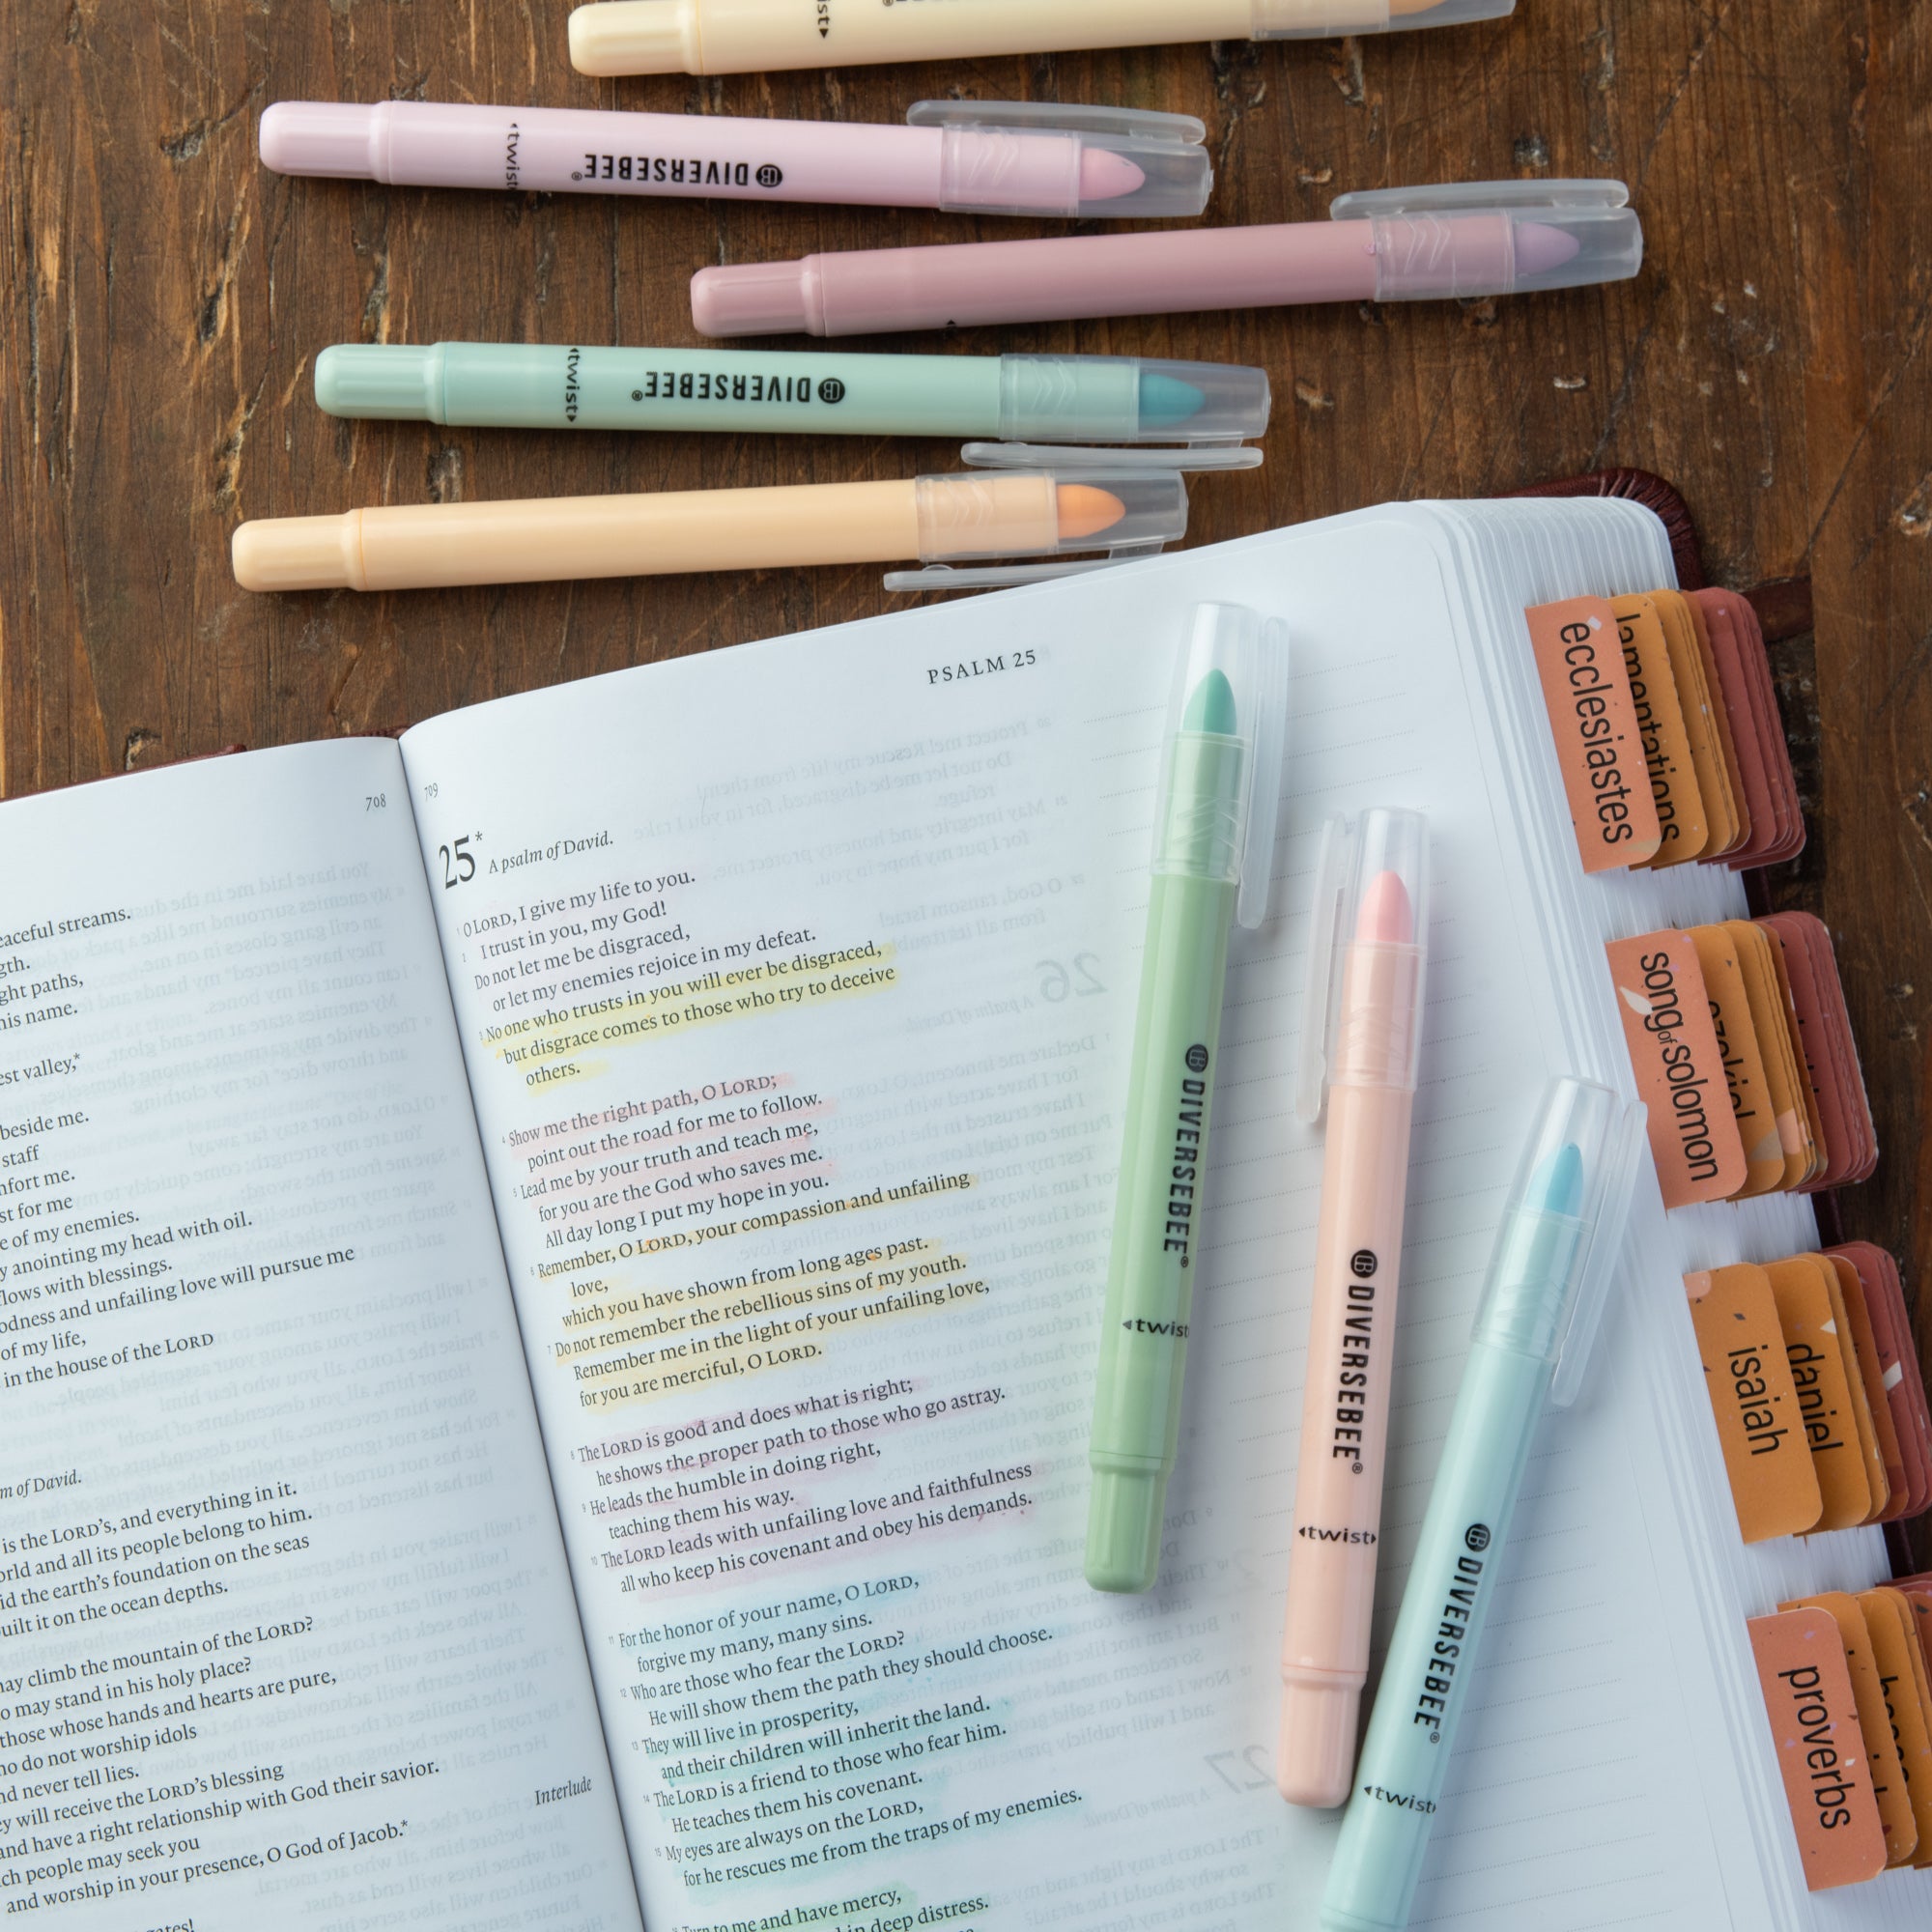 DIVERSEBEE RNAB0BXF7L52R diversebee bible highlighters and pens no bleed, 8  pack assorted colors gel highlighters set, bible markers no bleed through